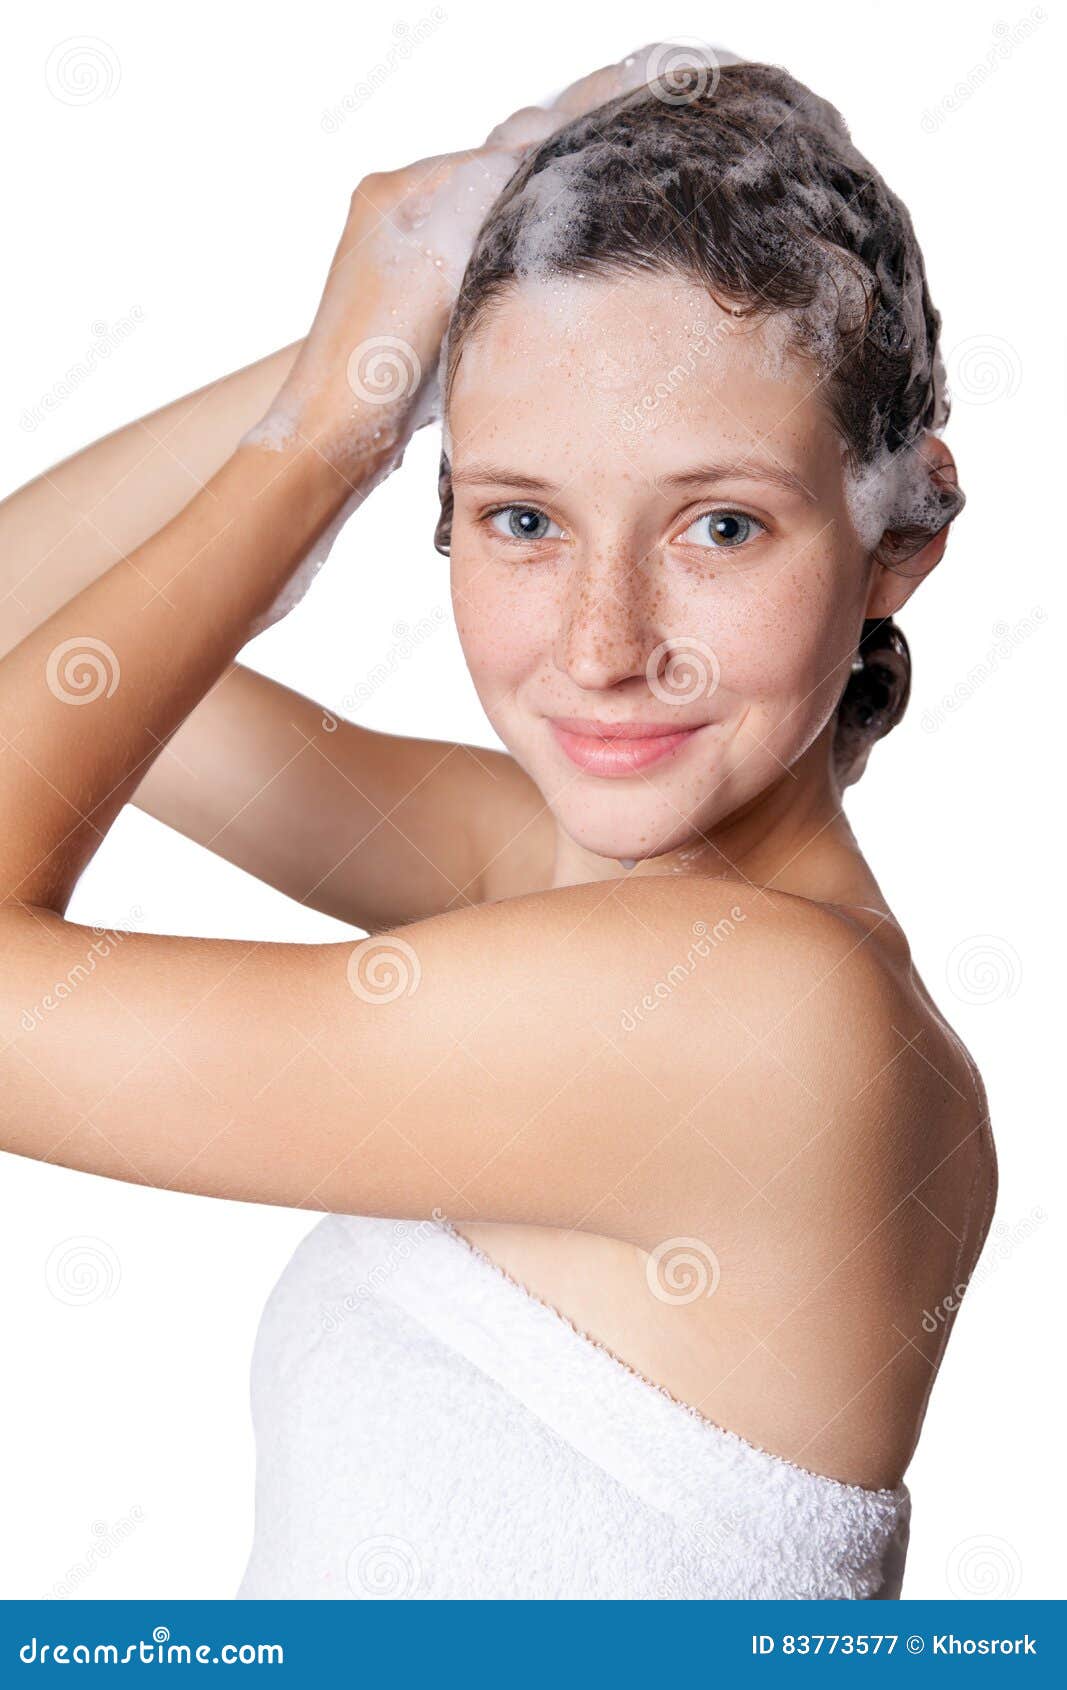 Close Up Of Woman Washing Her Hair In A Shower Stock Photo 